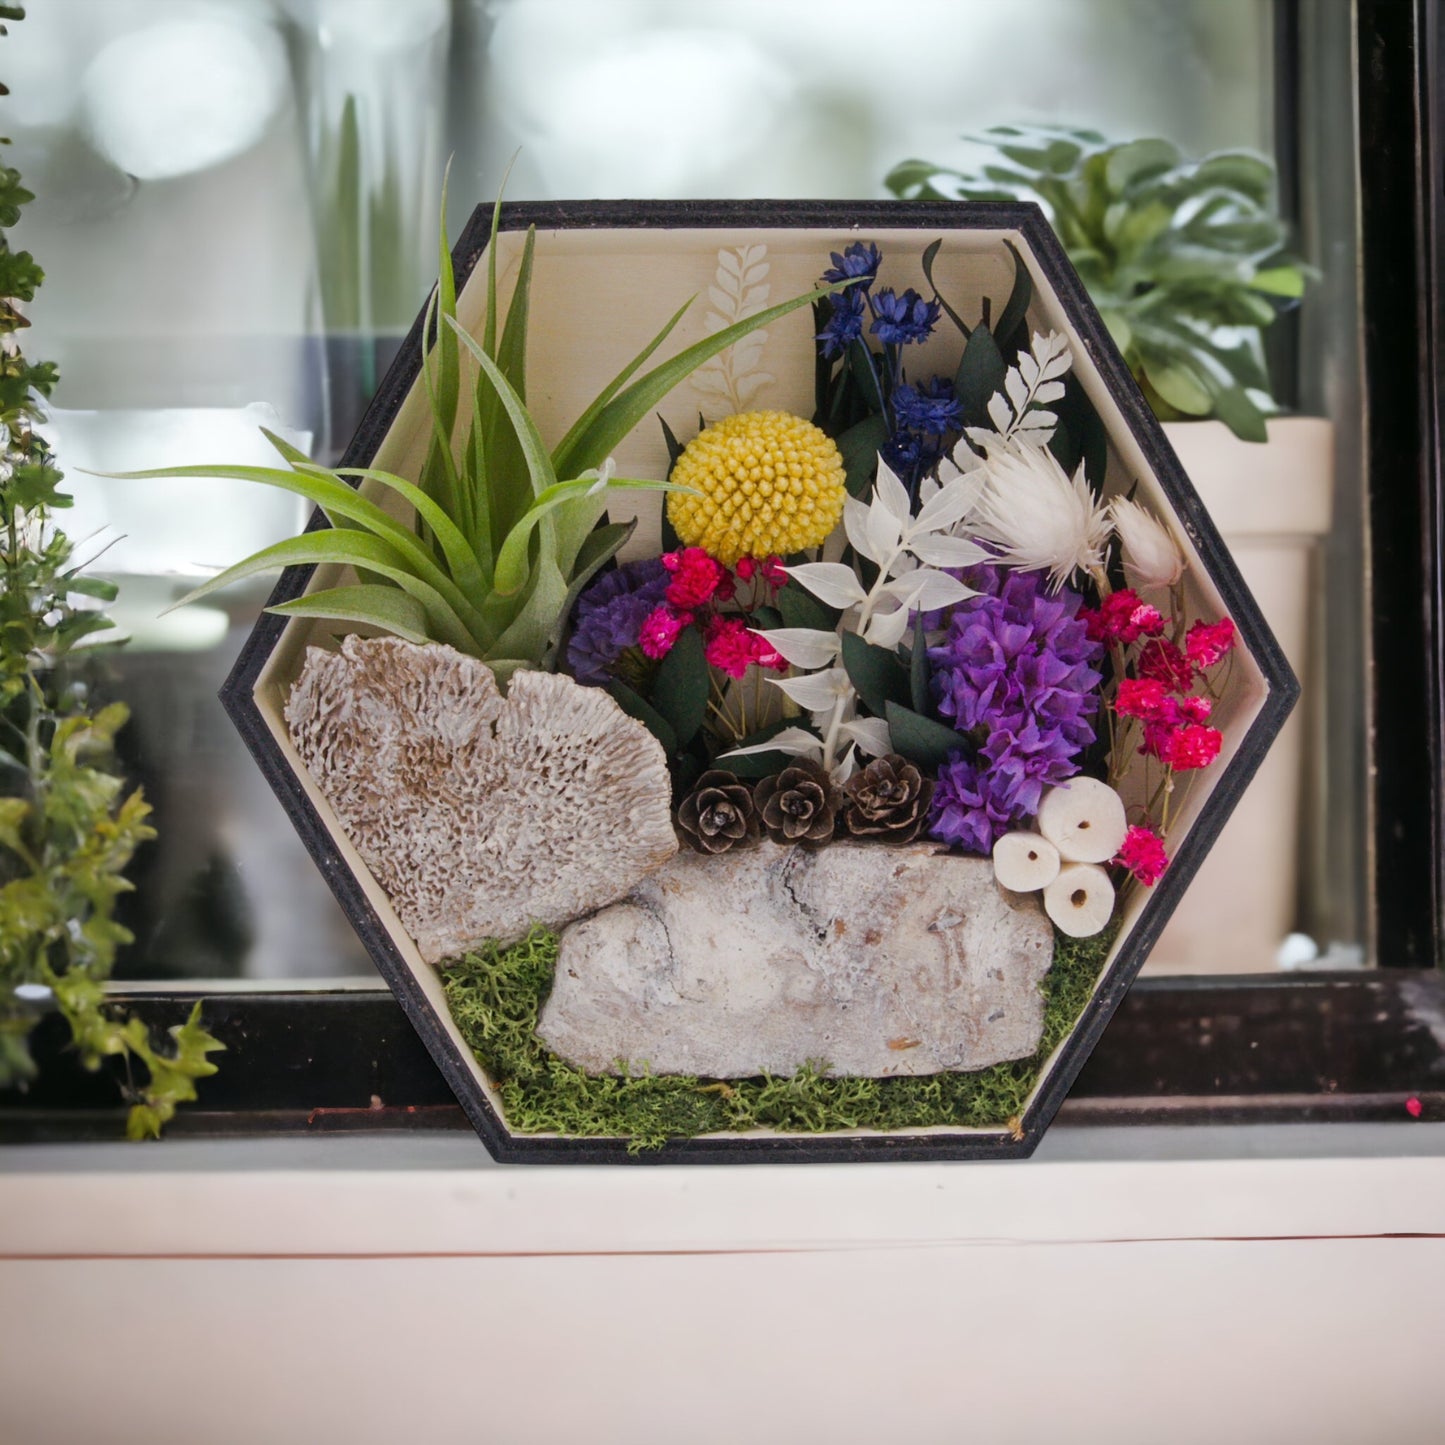 Wooden hexagon box frame stained black, filled with dried flowers, wood, moss and an airplant